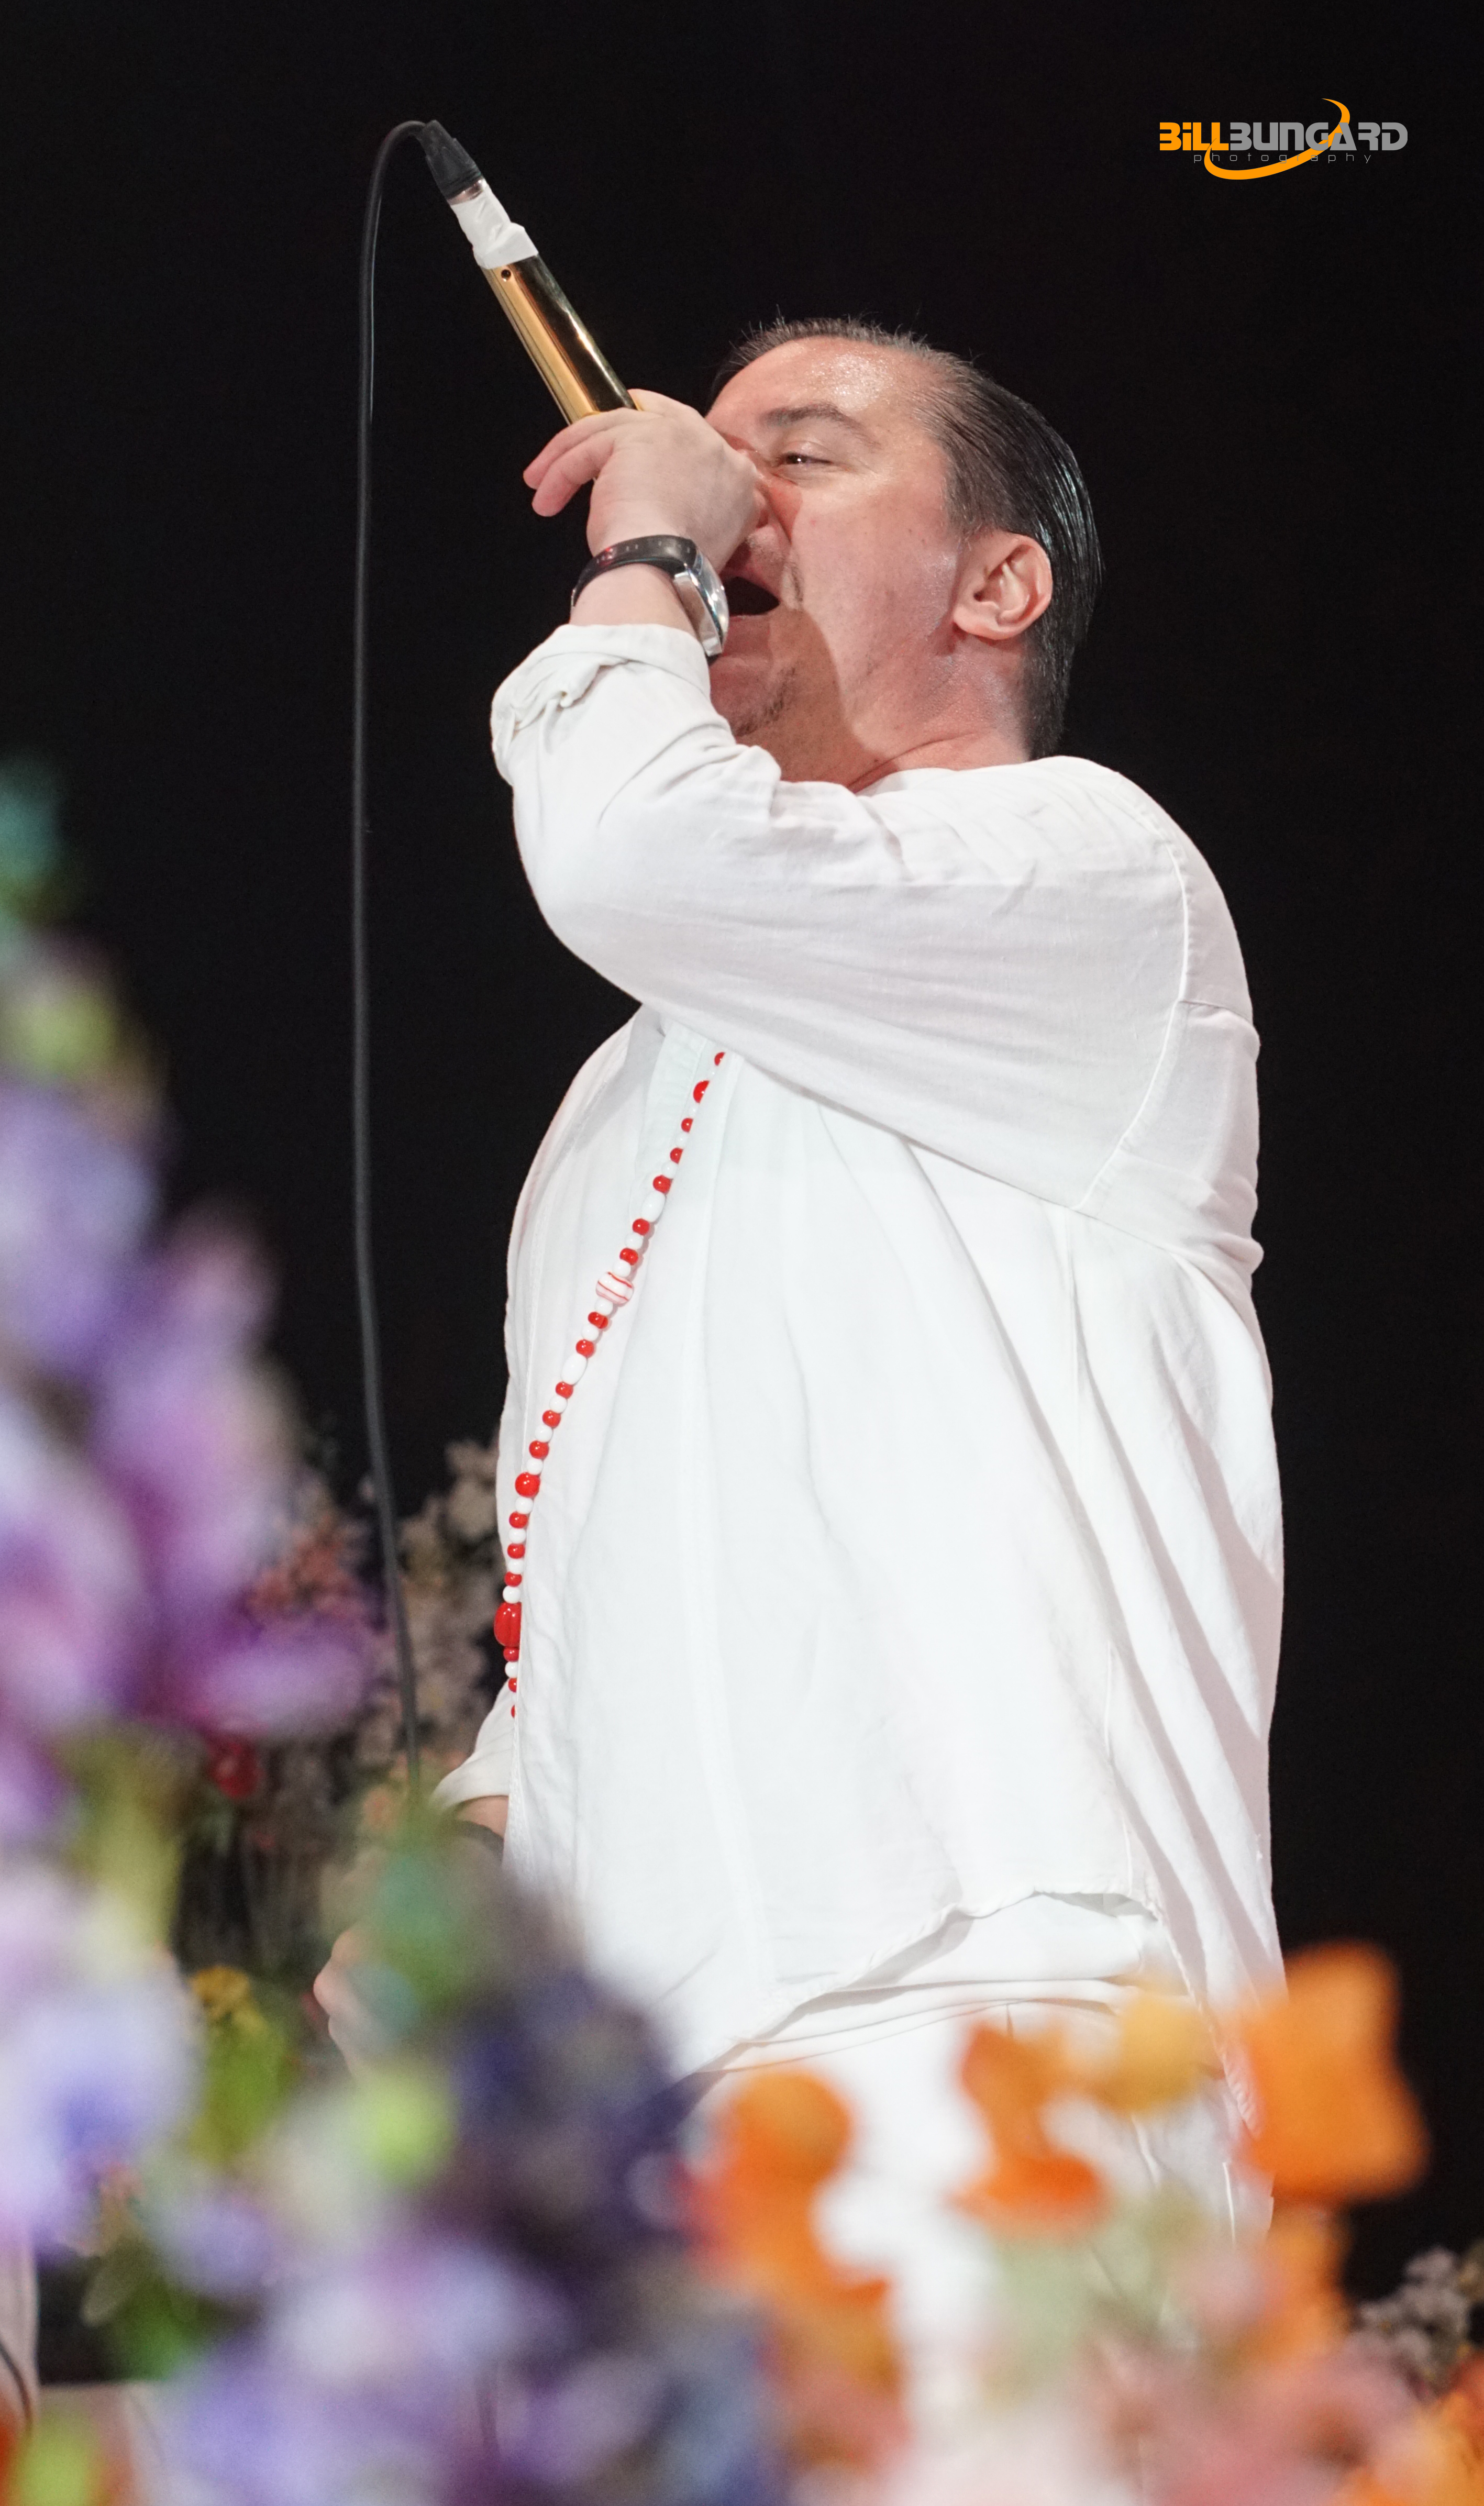 Mike Patton of Faith No More at The Paramount (Photo by Bill Bungard)